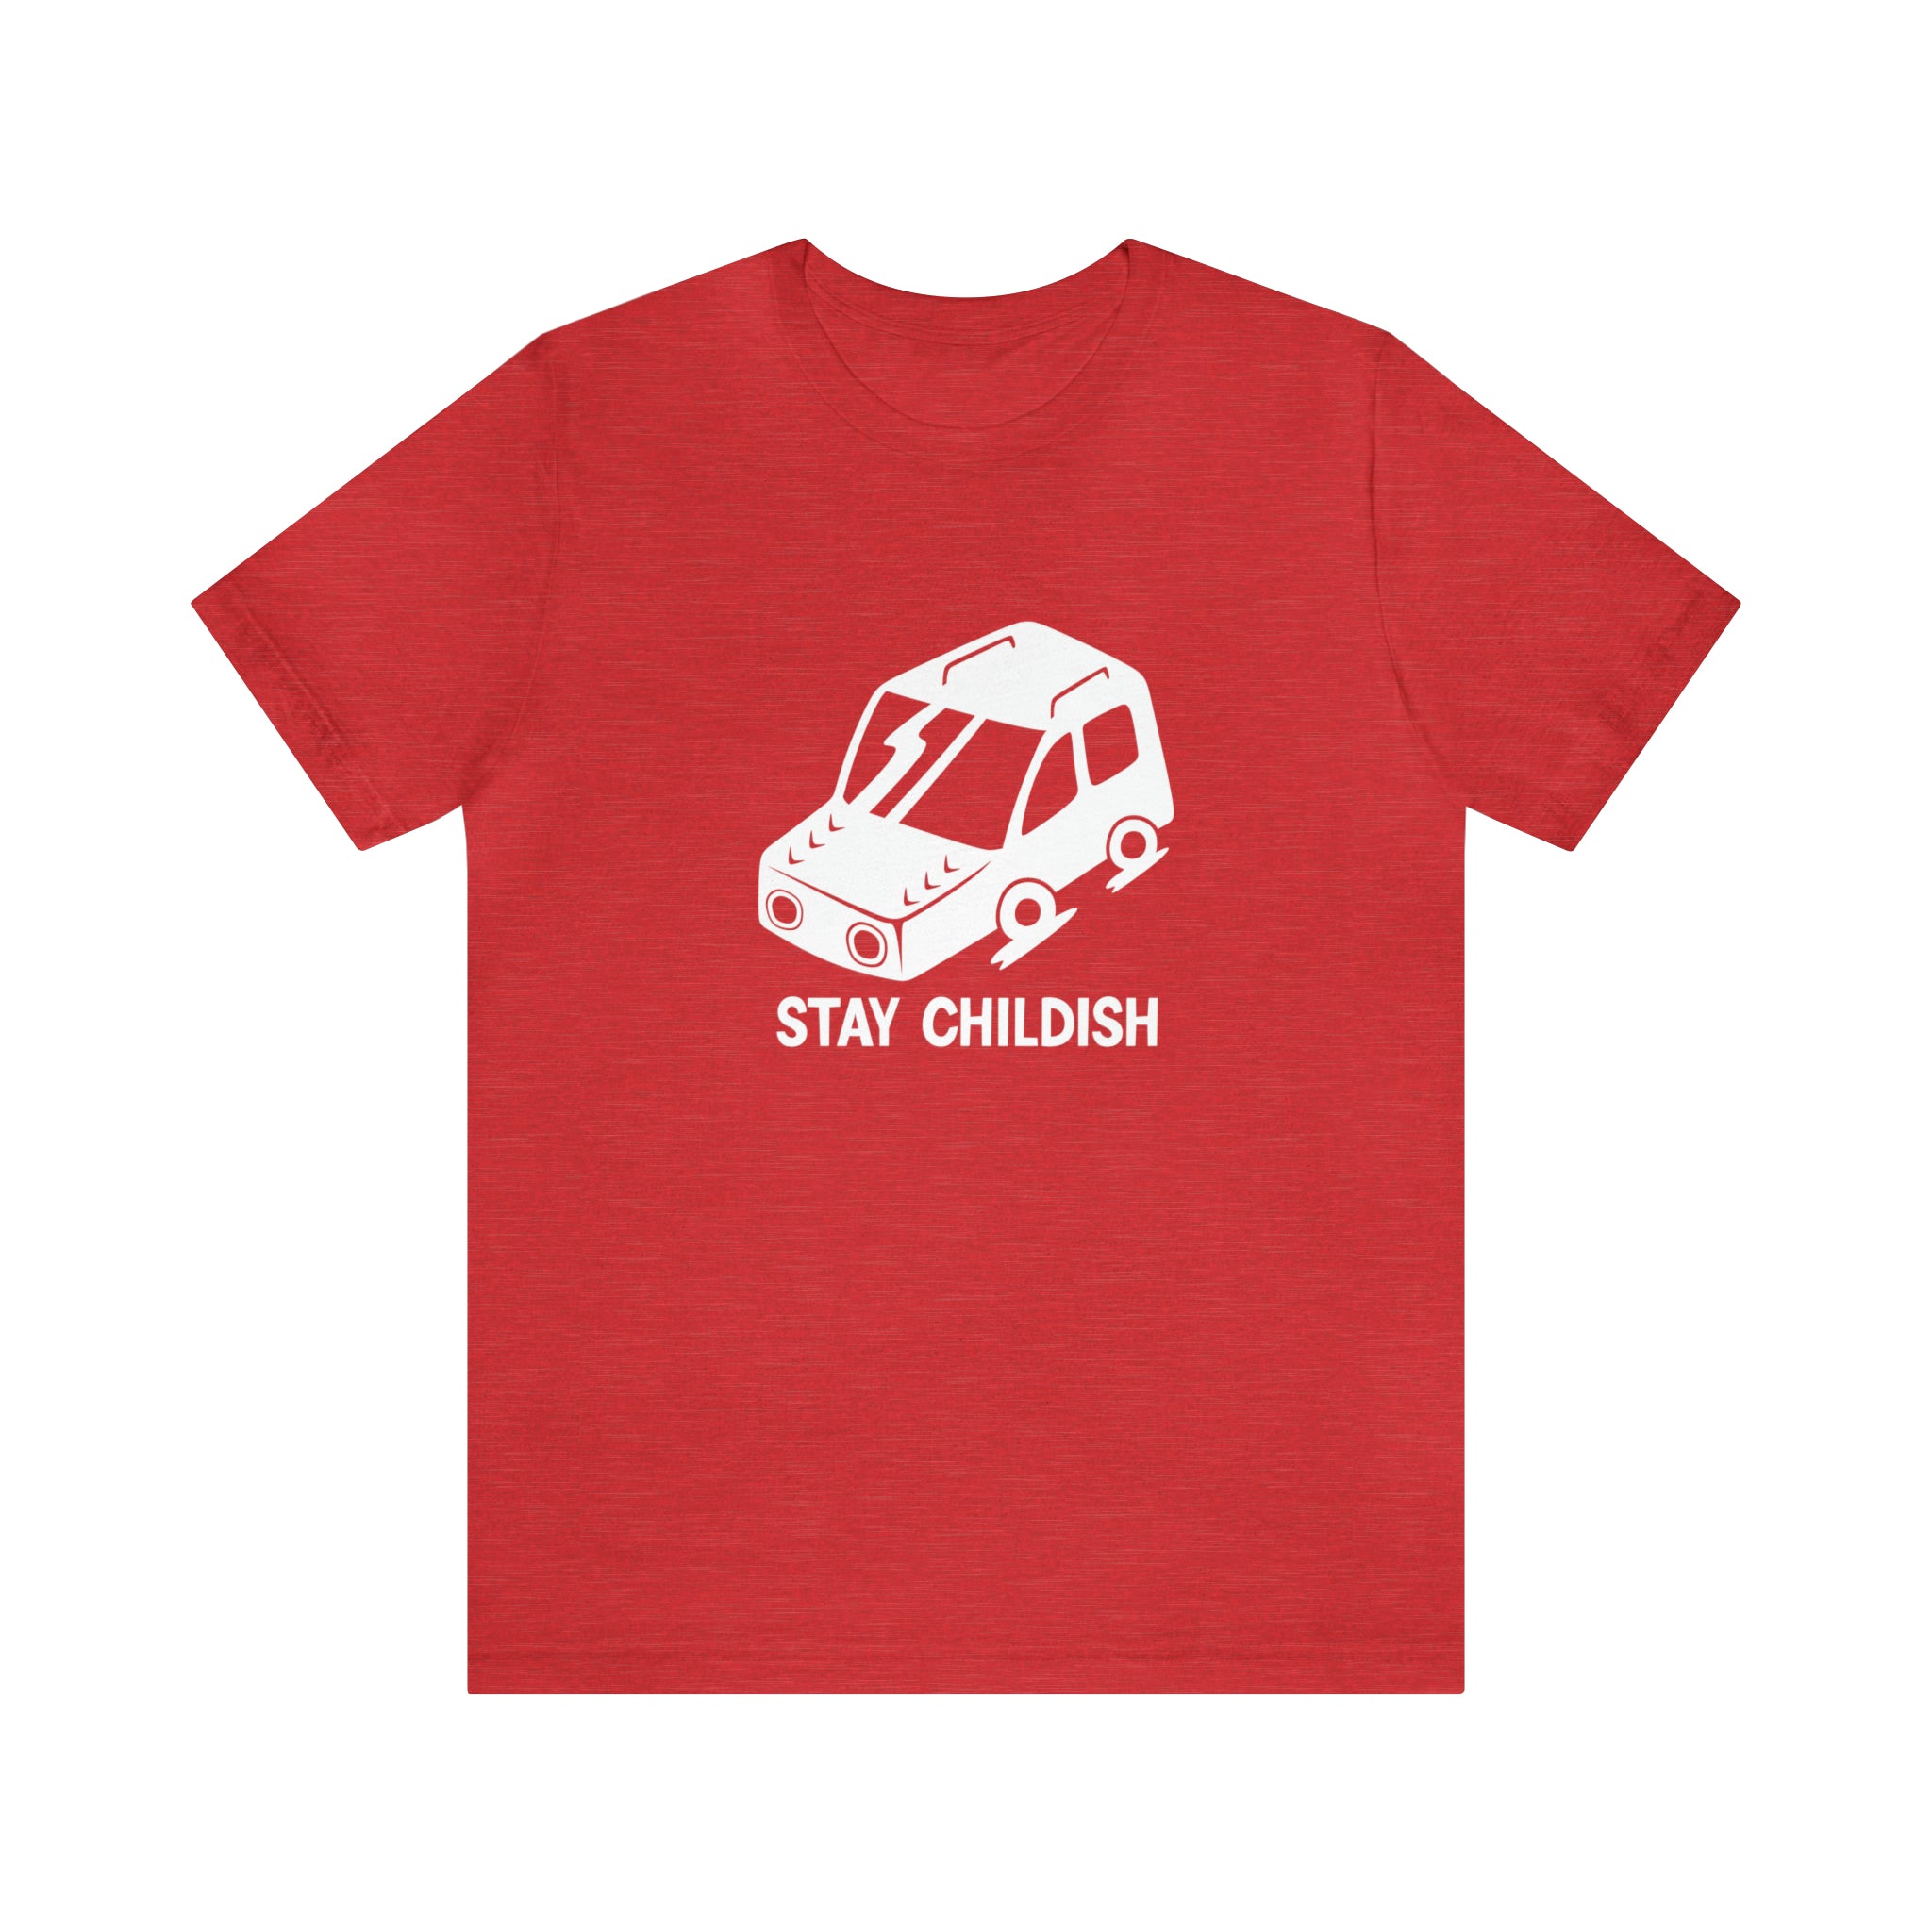 A red Stay Childish T-Shirt.